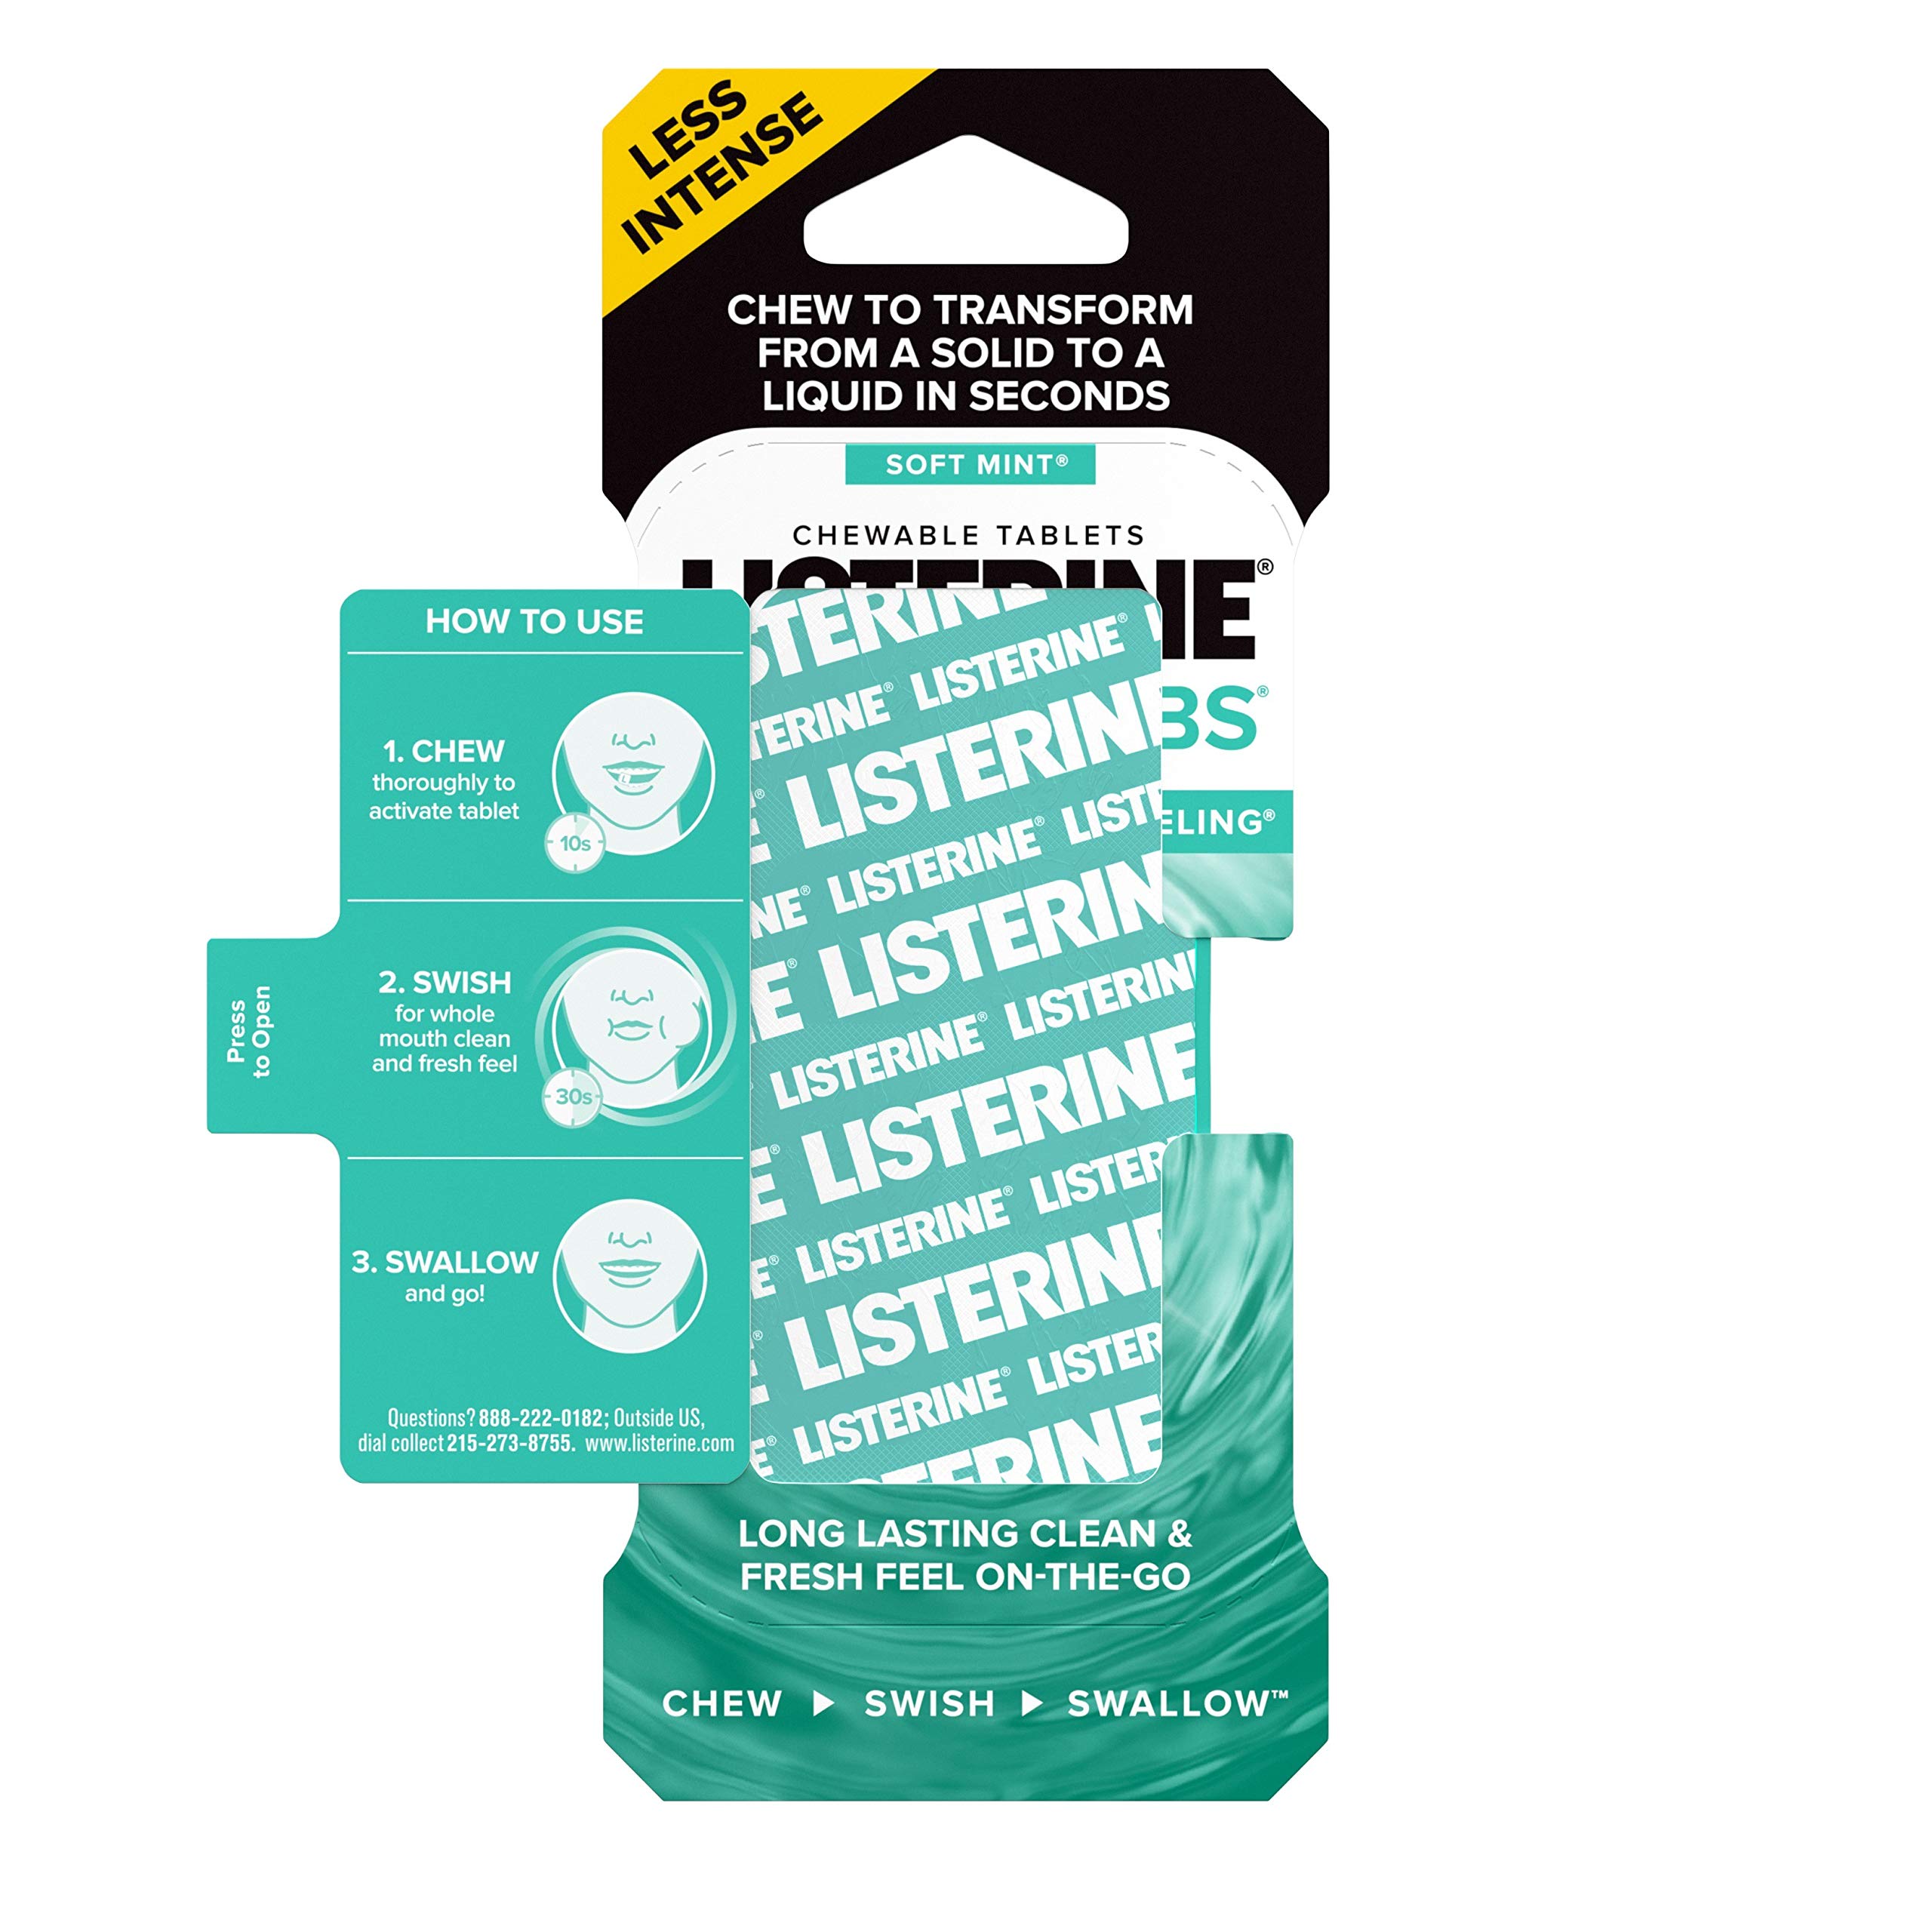 Listerine Ready! Tabs Chewable Tablets with Soft Mint Flavor, Revolutionary 4-Hour Fresh Breath Tablets to Help Fight Bad Breath On-the-Go, Sugar-Free, Alcohol-Free & Gluten-Free, 8 ct